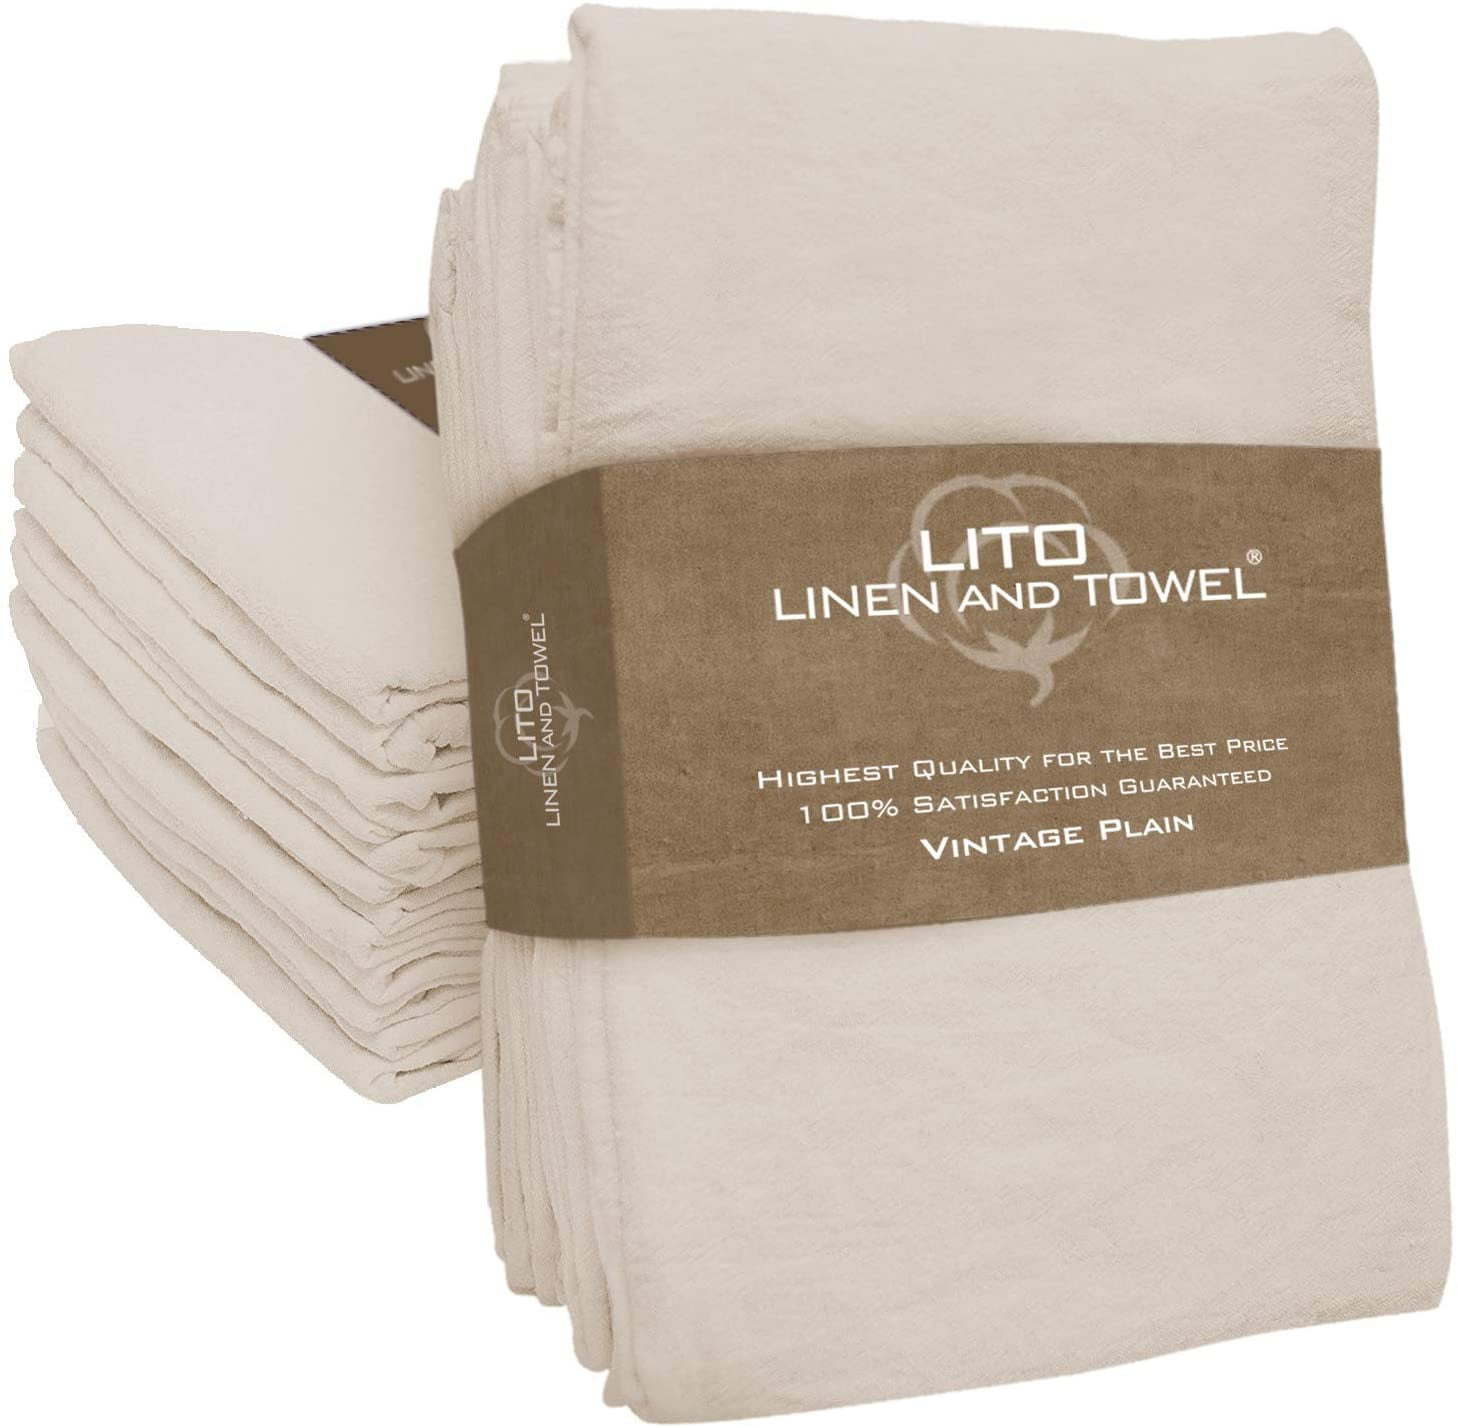 LANE LINEN Kitchen Towels Set - Pack of 6 Cotton Dish Towels for Drying  Dishes, 18”x